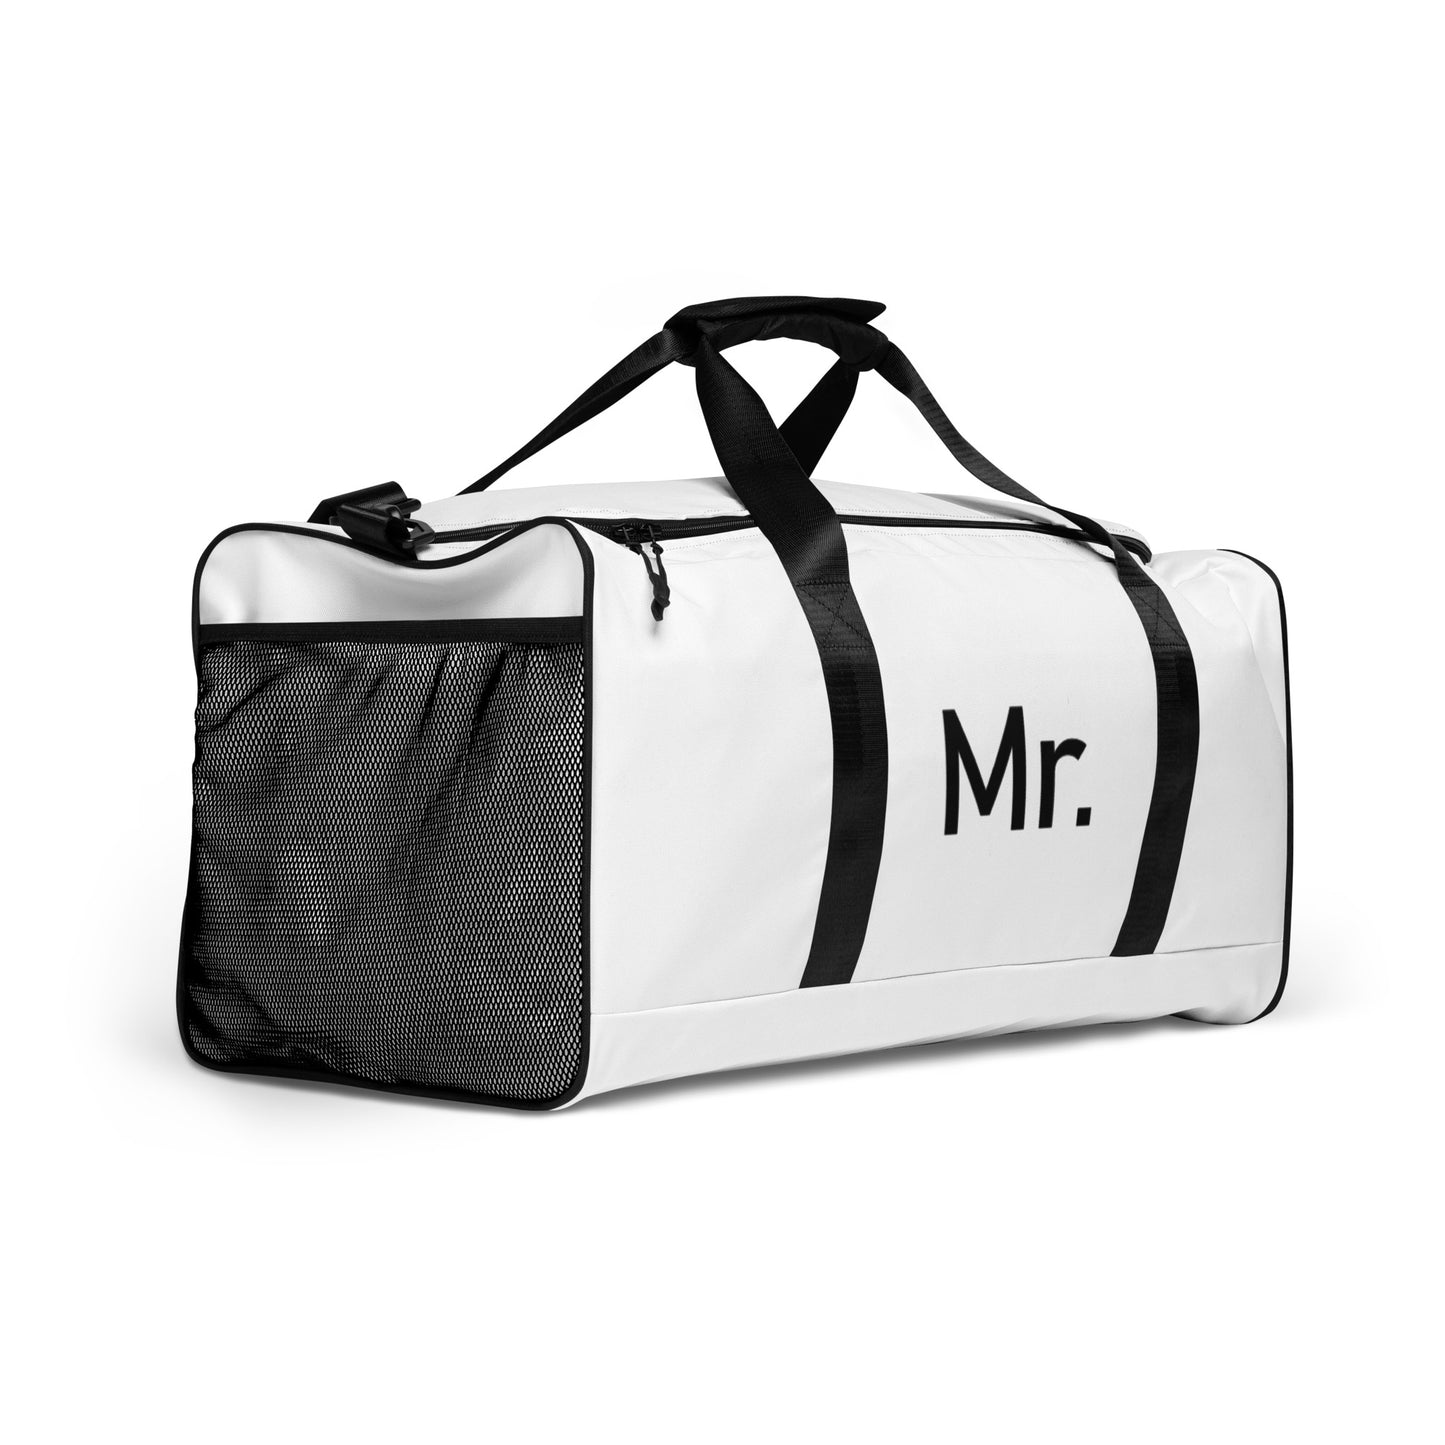 Mr. - Sustainably Made Duffle Bag